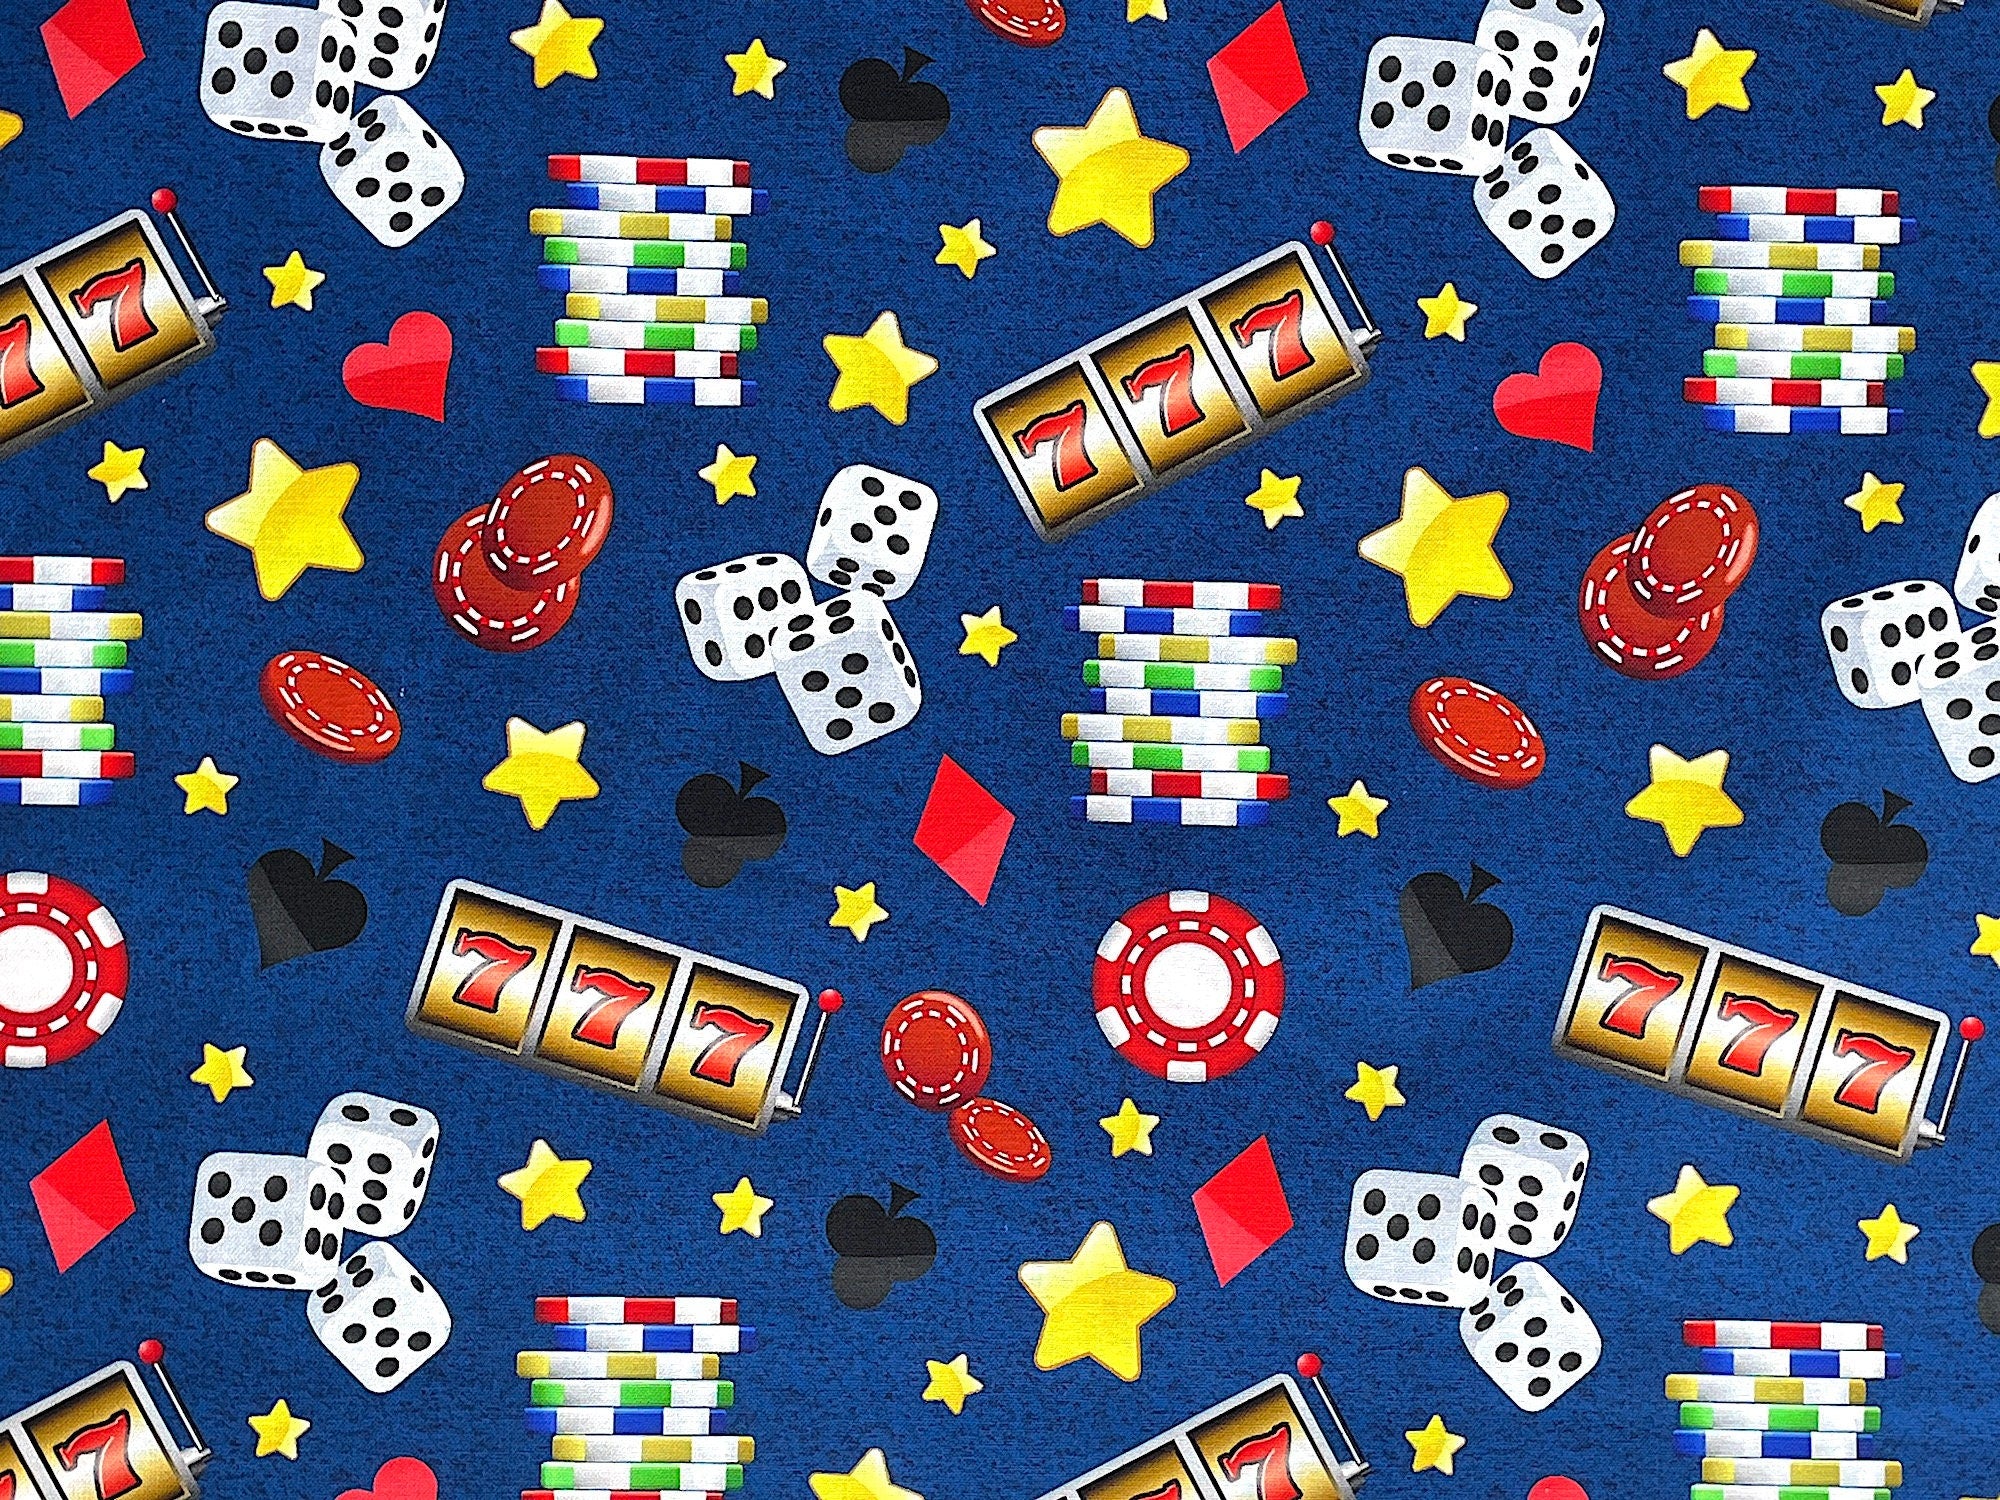 This blue casino fabric is covered with dice, game chips, stars hearts, diamonds and more